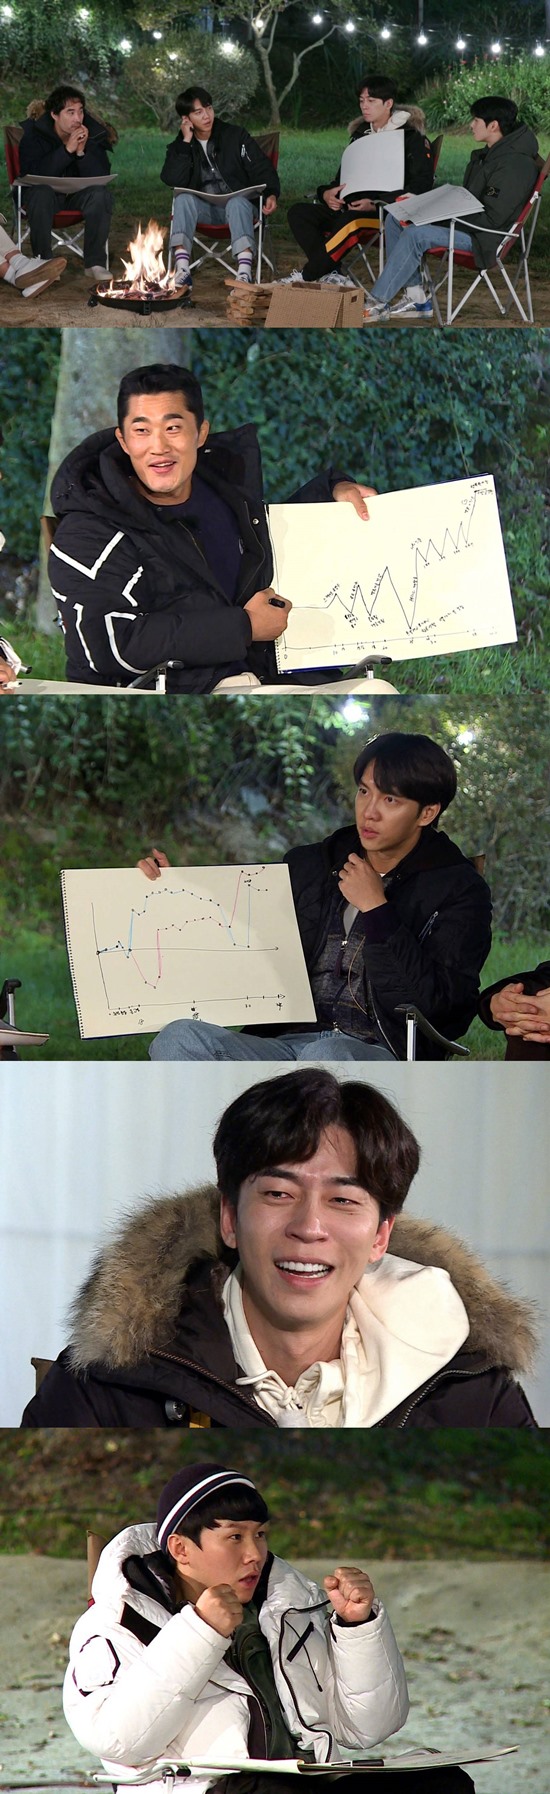 In All The Butlers, life graphs of Bae Seong-woo and Lee Seung-gi, Yang Se-hyeong, Shin Sung-rok, Cha Eun-woo and Kim Dong-Hyun are revealed.When the night of camping ripe, Bae Seong-woo and All The Butlers members shared their lives by drawing life graphs.They draw attention by revealing the graph and saying that they have been openly confident about their life bends.Fighter Kim Dong-Hyun briefly quit his workout and told him about his days of part-time jobs, such as PC rooms and blocked sewers, and Lee Seung-gi said, I did not hear my hearts voice in the past.In particular, Shin Sung-rok said, Bae Seong-woo, who was looking at his graph, was really hard and full of fighting.I felt such a feeling and I was so cool and envious. (I have lived hard these days) without knowing who I am, he said. I really lived hard, he said. I miss the past, he said.On the other hand, the next day, according to the proposal of Bae Seong-woo, Lets find out the meaning of the sky, Bae Seong-woo and the members both challenge the paragliding flying in the sky.The life graph, which Bae Seong-woo and members have sincerely Confessions, can be found on SBS All The Butlers broadcasted at 6:25 pm on the 25th.Photo: SBS